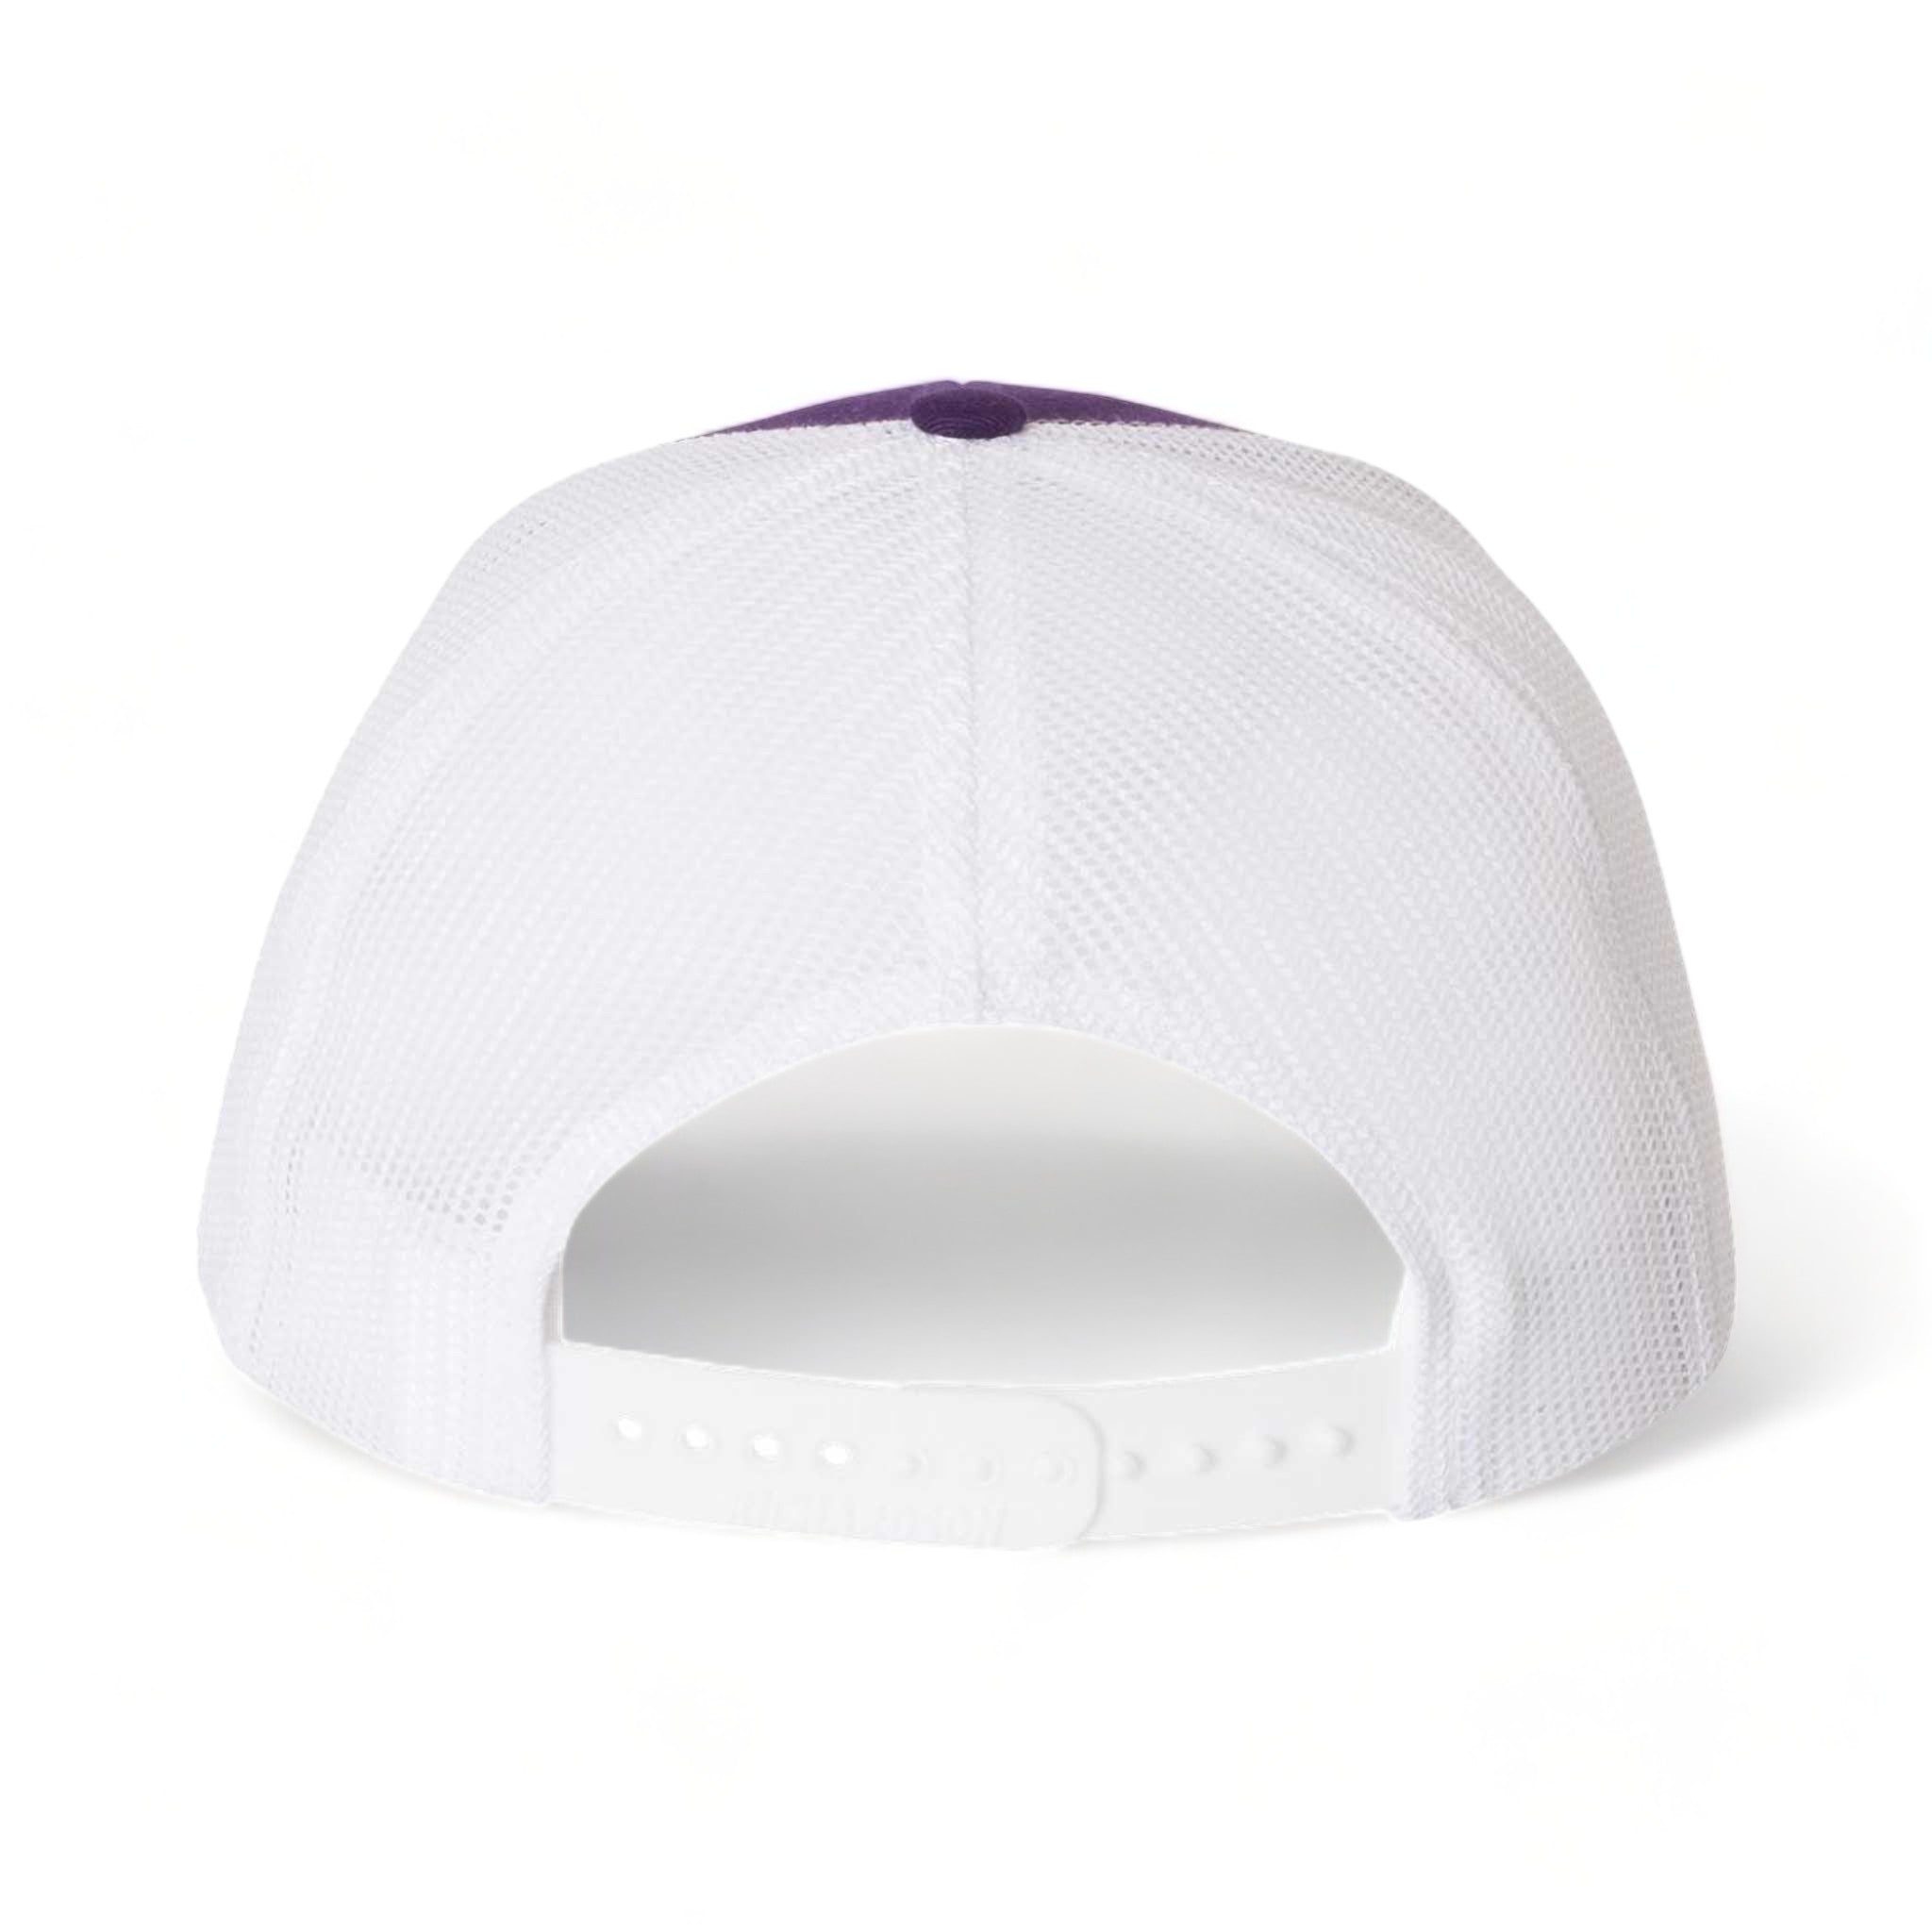 Back view of Richardson 112 custom hat in purple and white